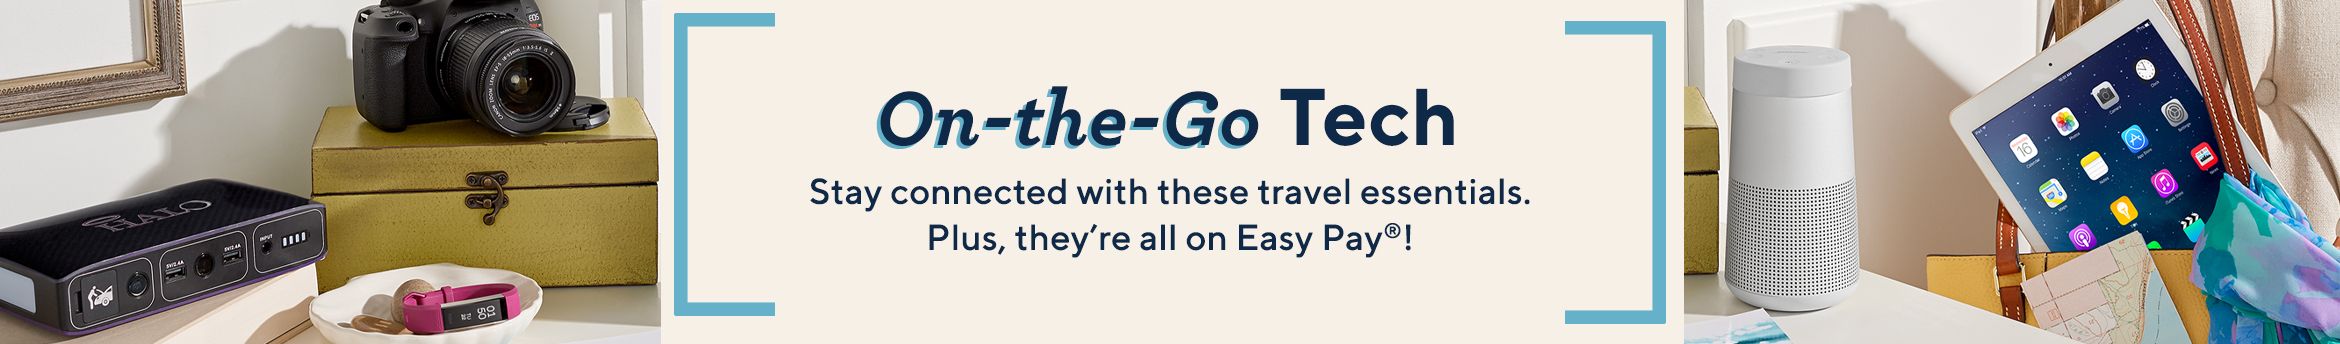 On-the-Go Tech.  Stay connected with these travel essentials.   Plus, they're all on Easy Pay®!